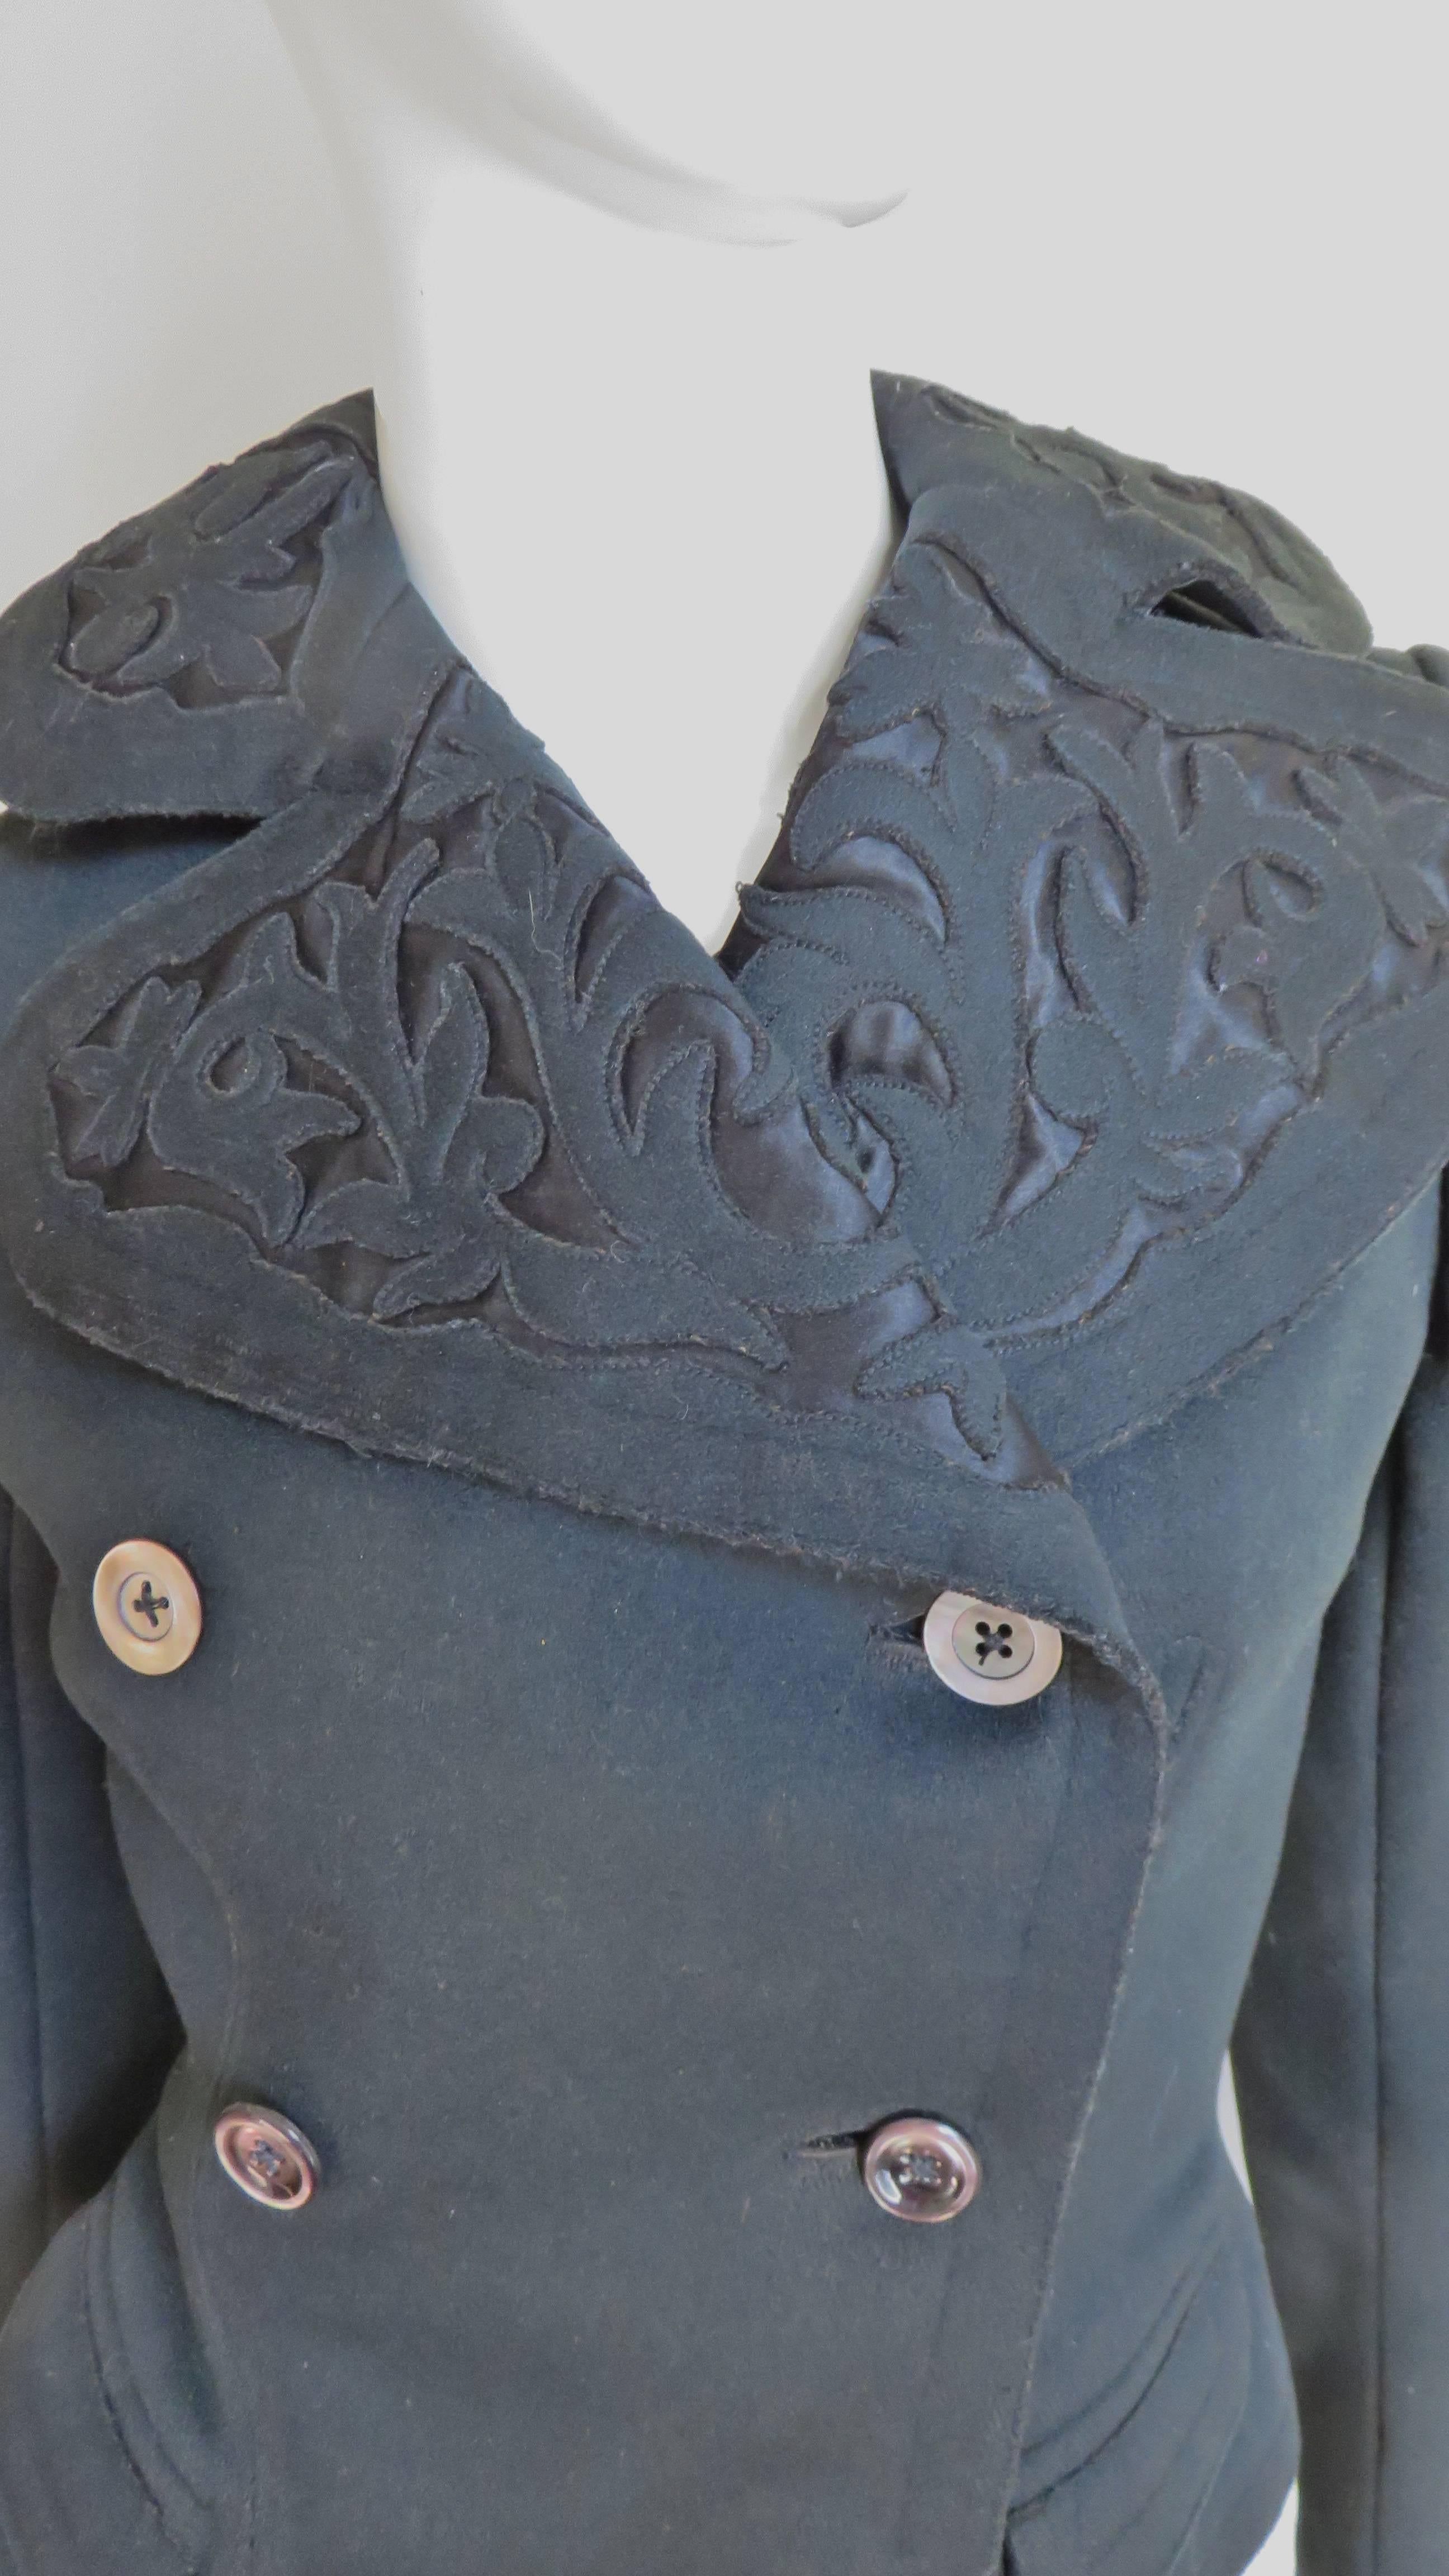 An incredible black wool jacket from the early 1900's.  It has long sleeves, small waist welt flap pockets and a rounded lapel collar with intricately cut elaborately appliqued wool. The detail is amazing.  It is double breasted with heavy mother of